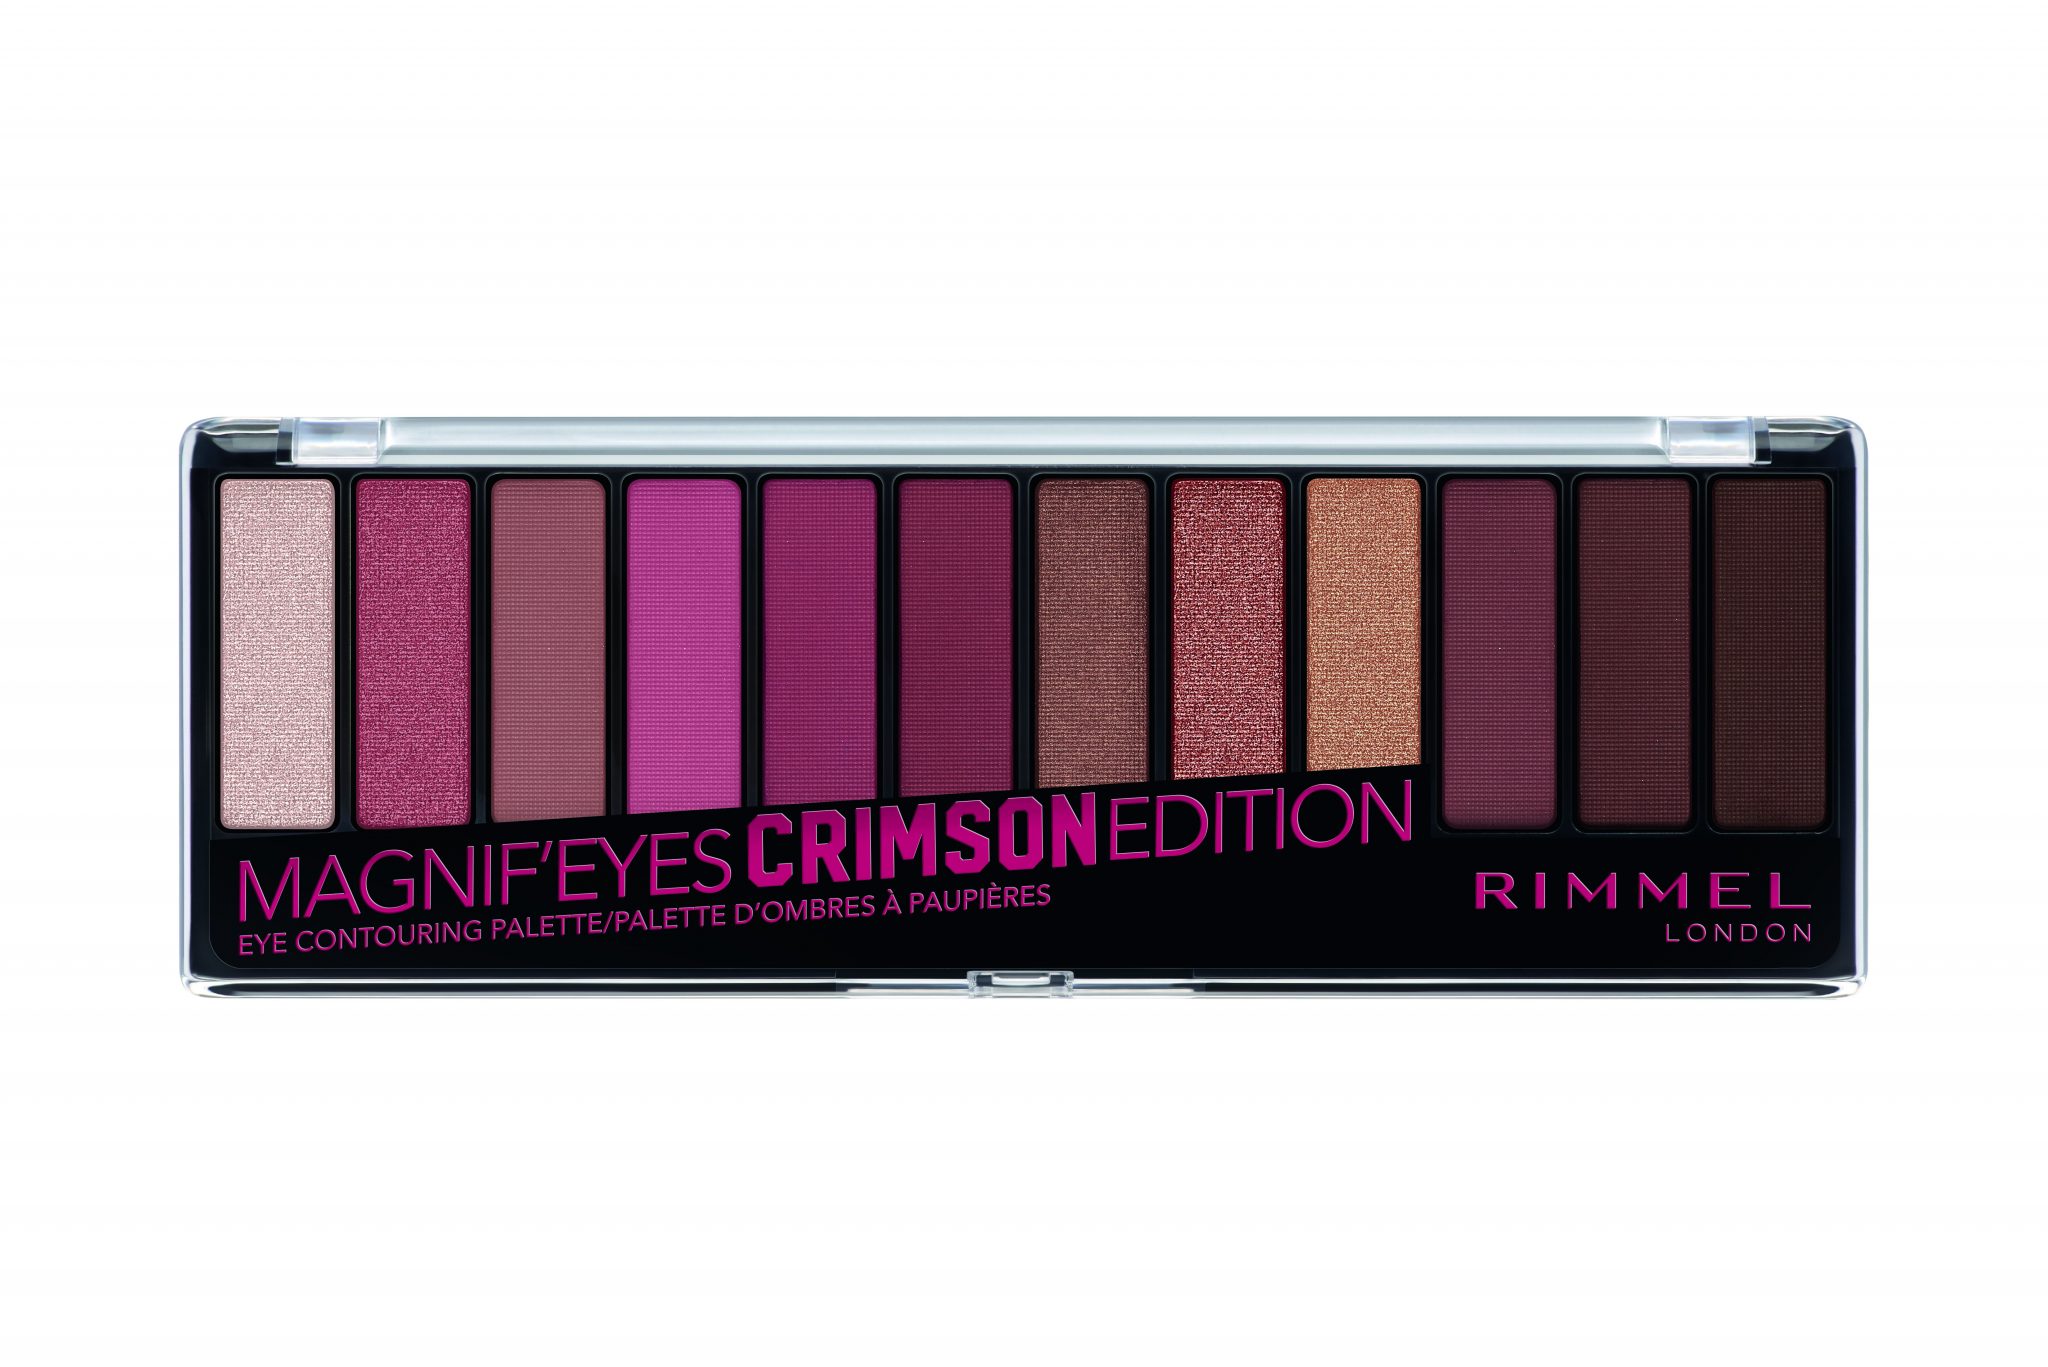 13 drugstore products that will definitely sell out for fall